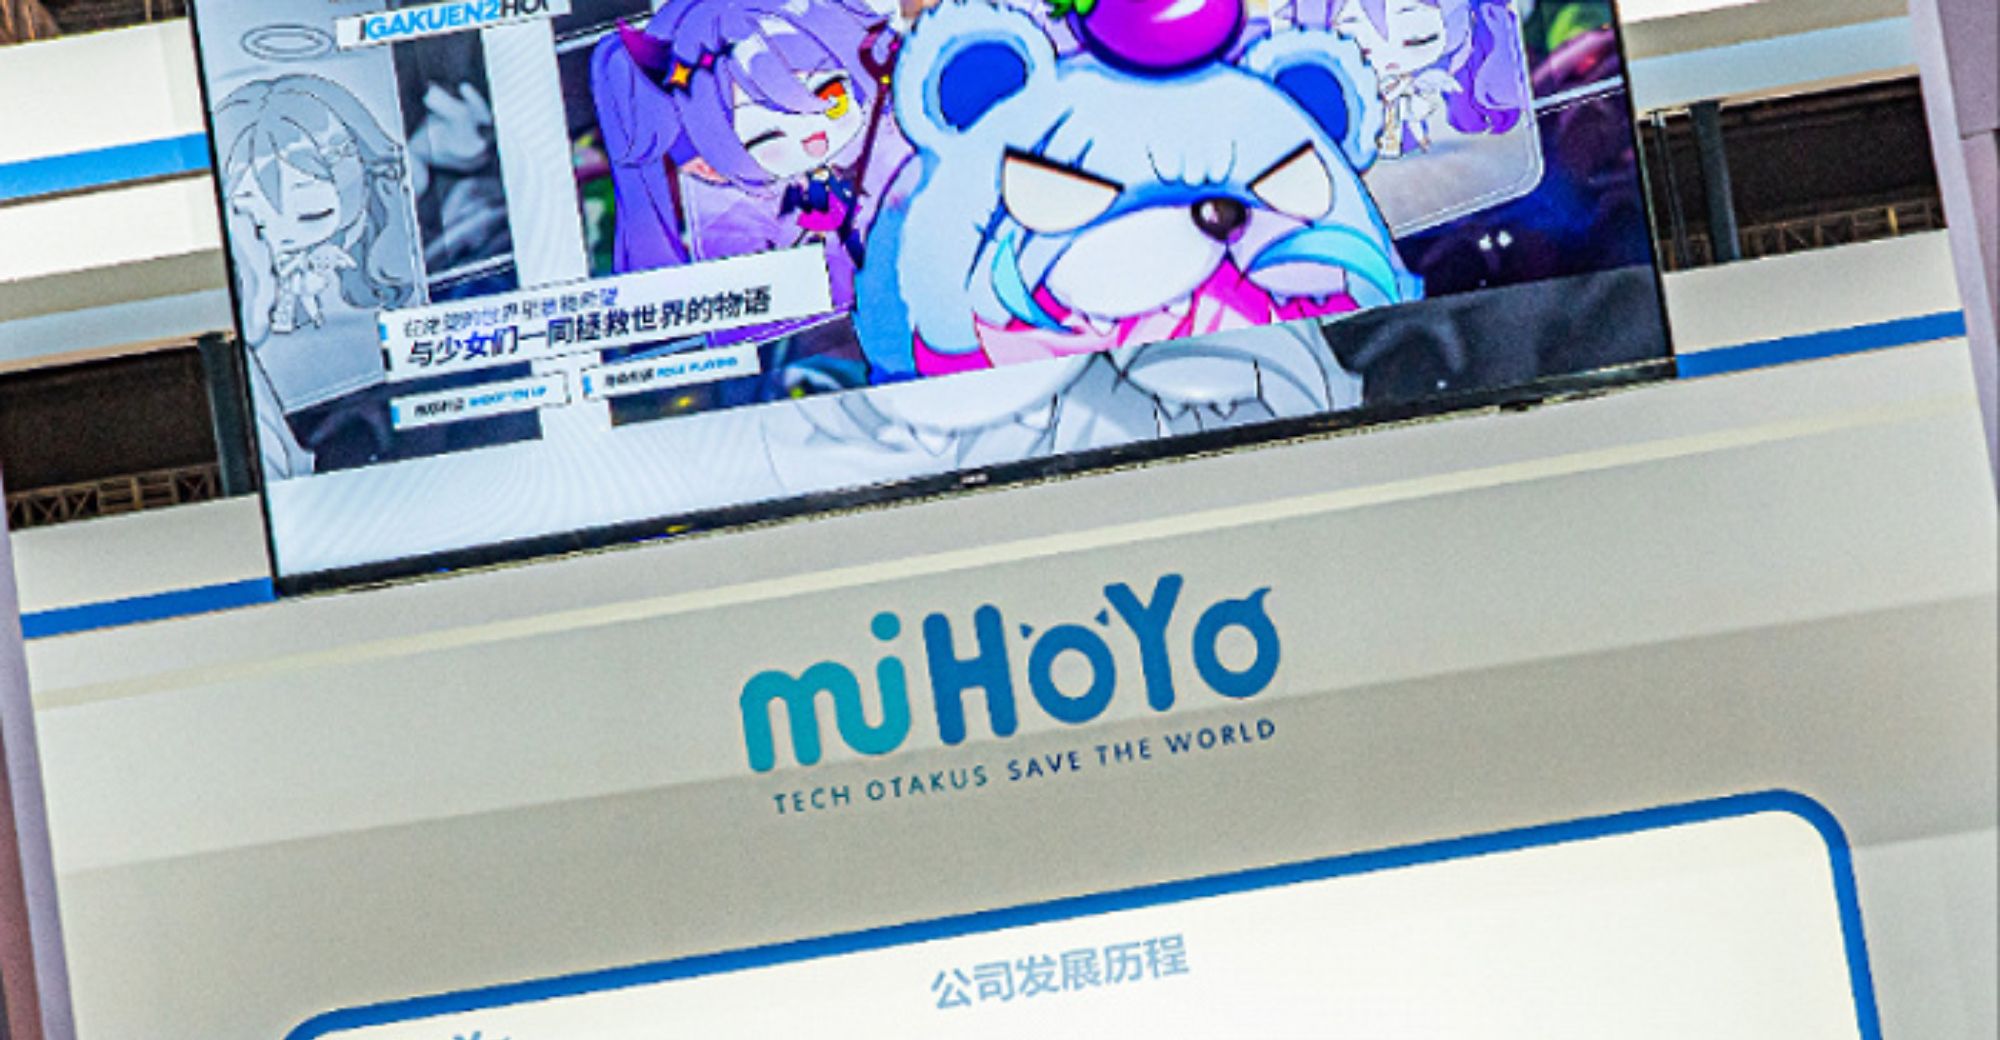 Mihoyo Undergoes Major Personnel Shift as Founder Cai Haoyu Takes Step Back